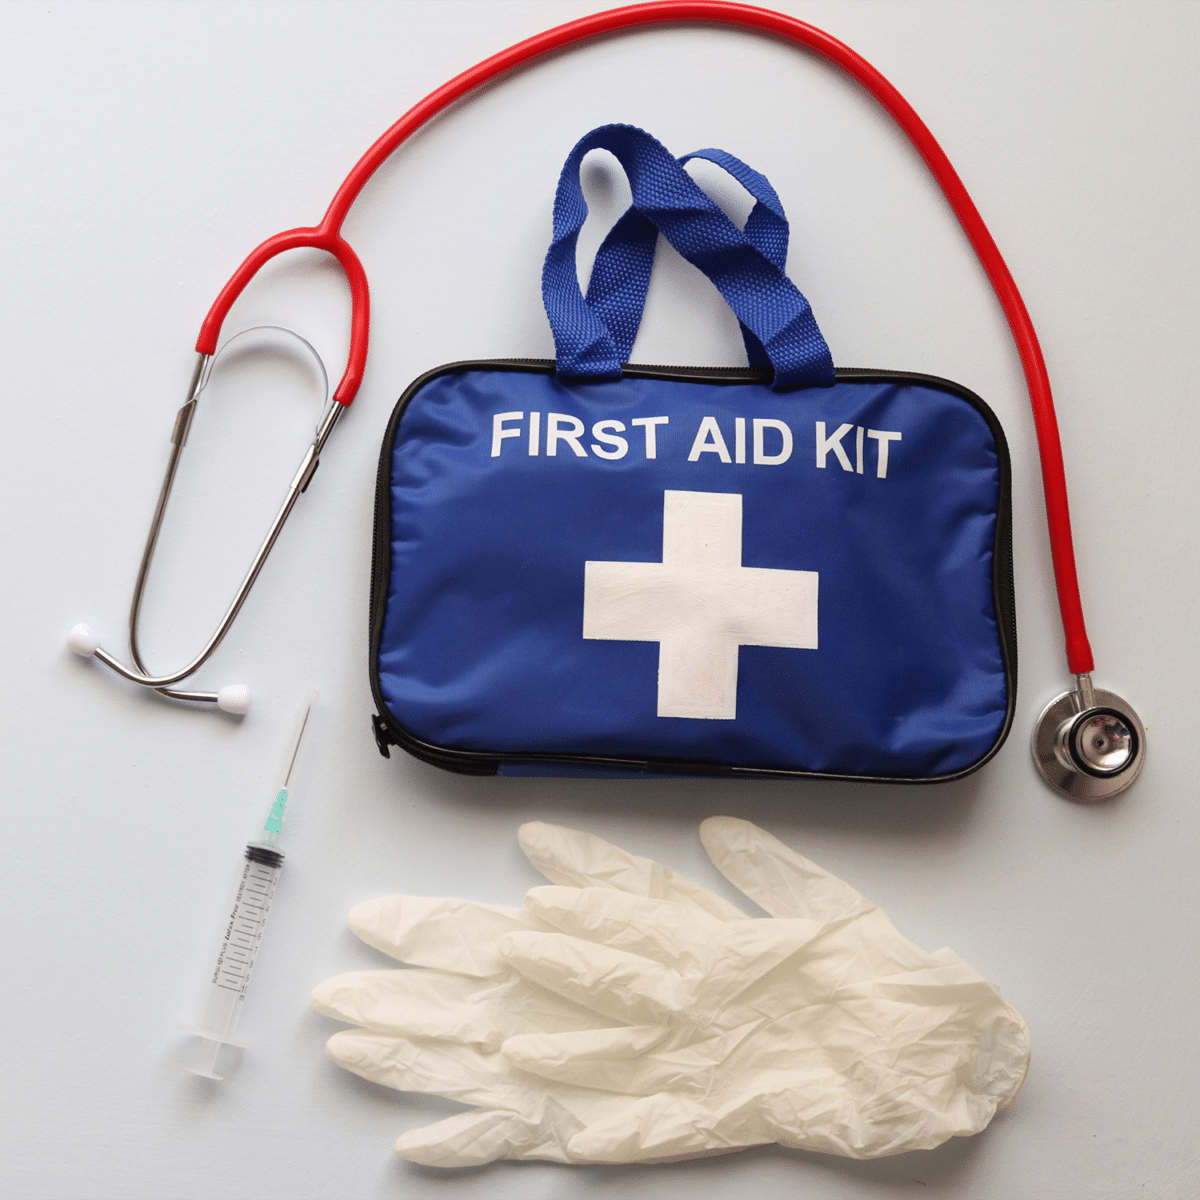 What to put in a pet first aid kit for dogs or cats